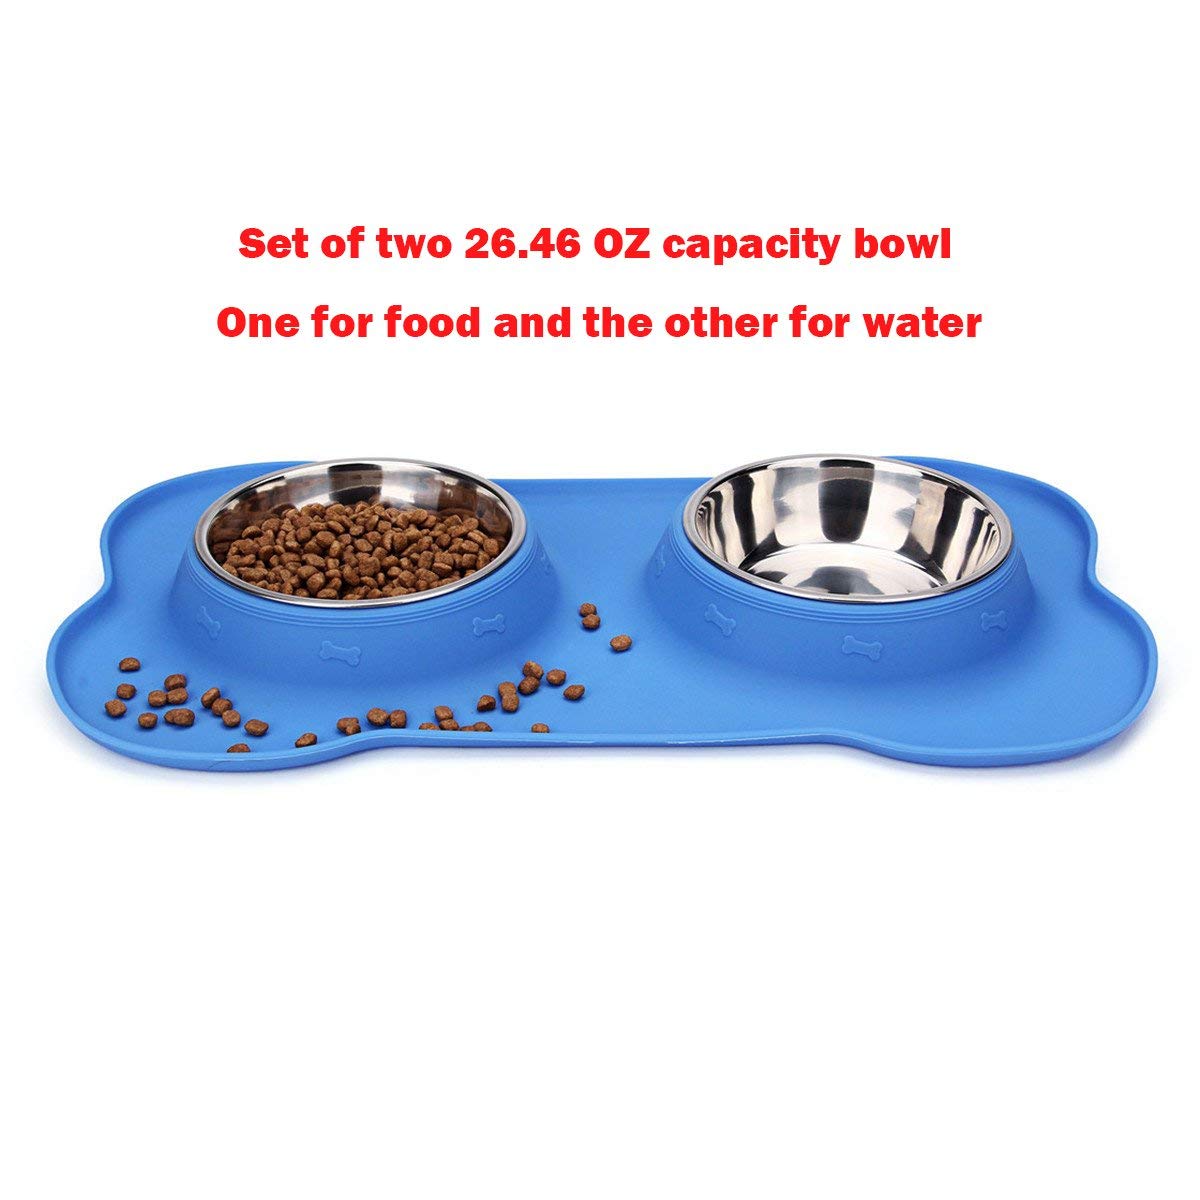 Hubulk 2 Stainless Steel Pet Dog Bowls with No Spill Non-Skid